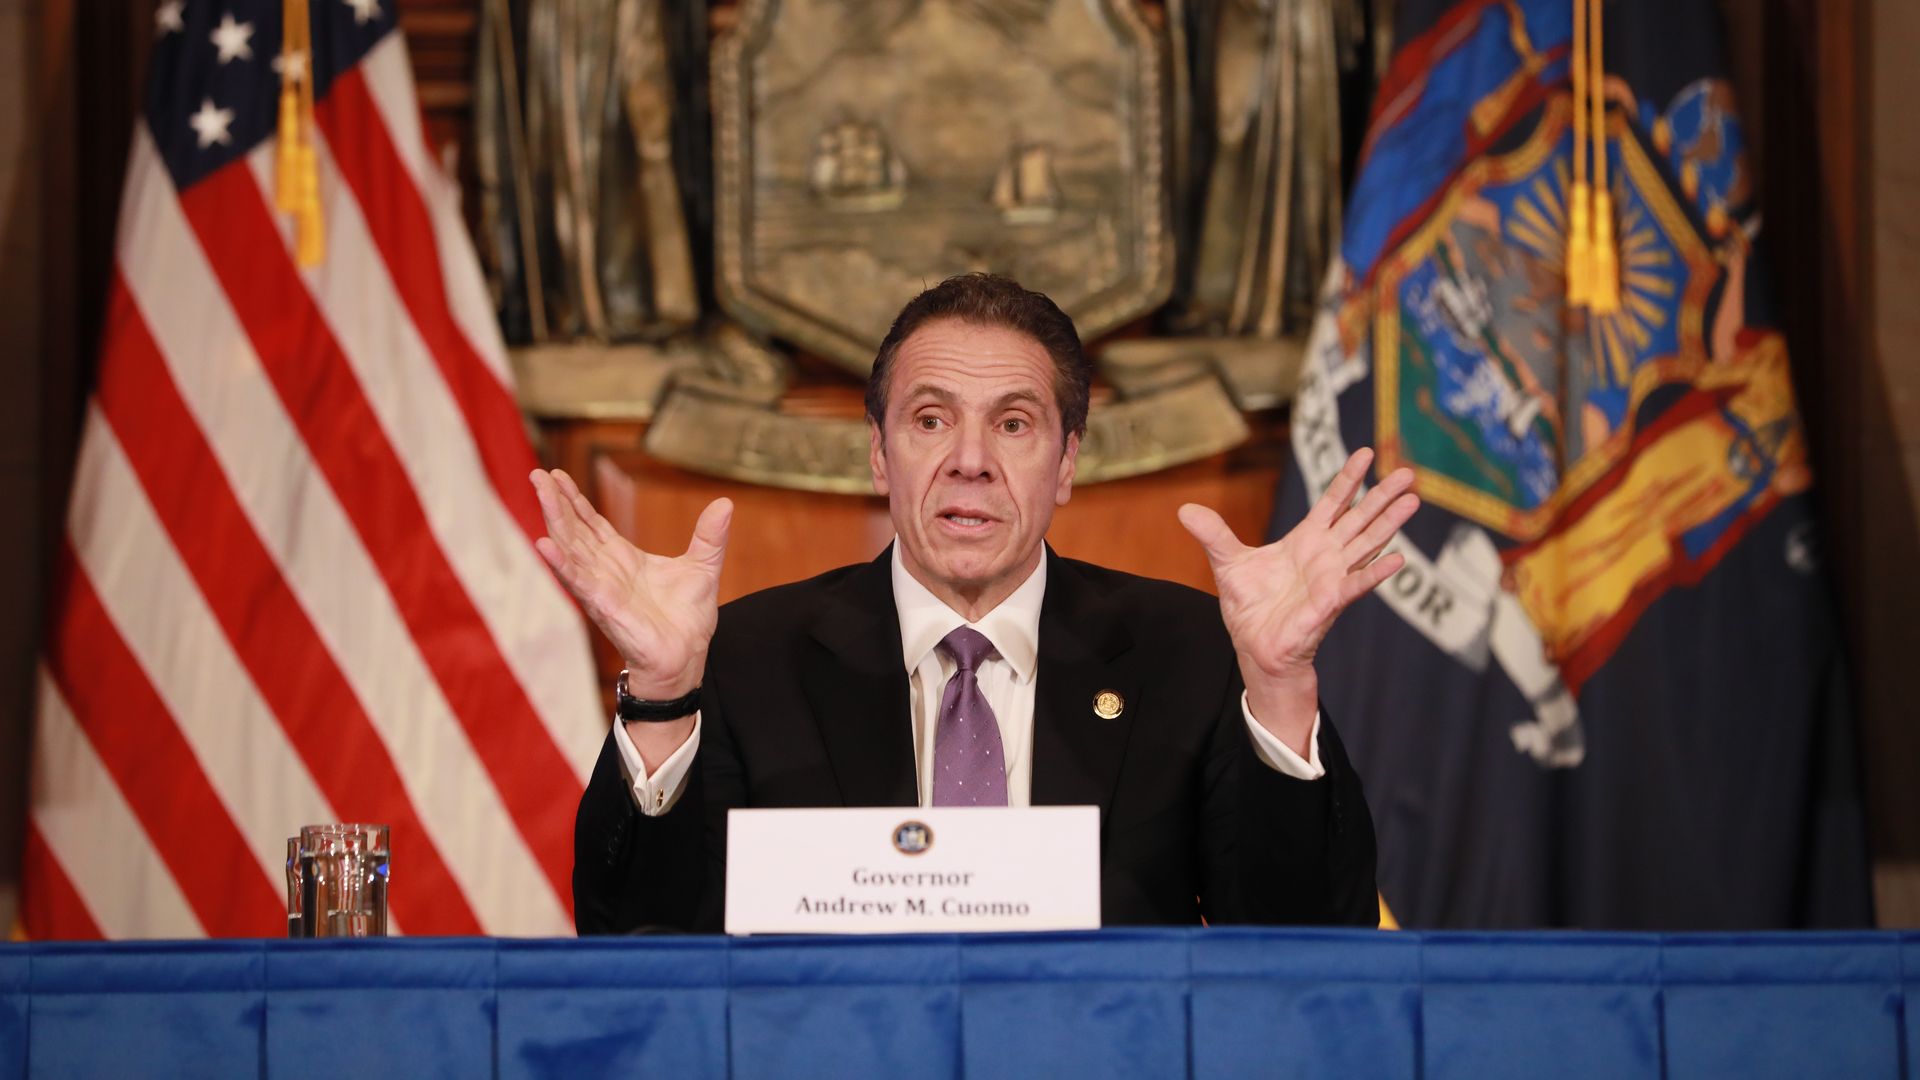  New York Governor Andrew Cuomo gives his a press briefing about the coronavirus crisis on April 17